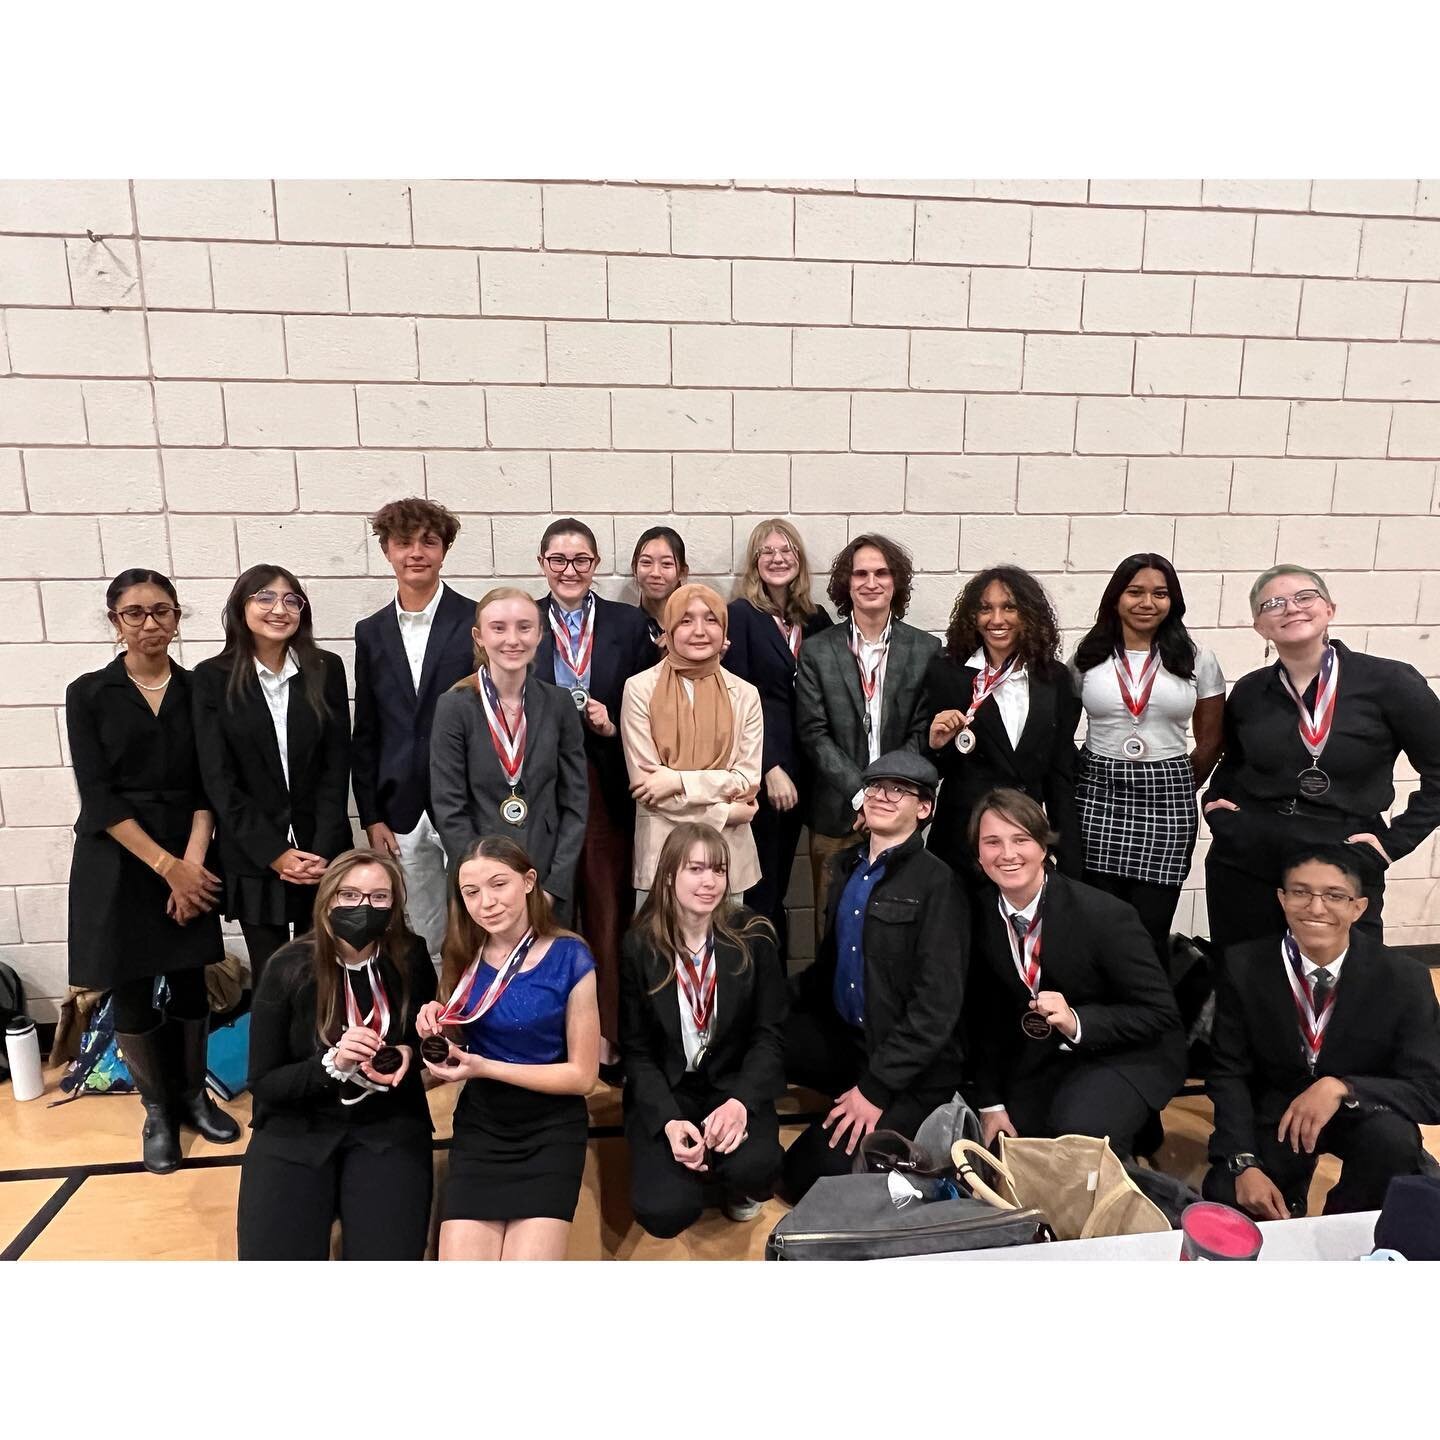 Congratulations to these 18 students for their stellar performance at the Cottonwood Classic a few weeks ago!

We brought home FOUR 1st place finishes (almost half of the events we entered in!) with numerous others placing in the top 3. Swipe to see 